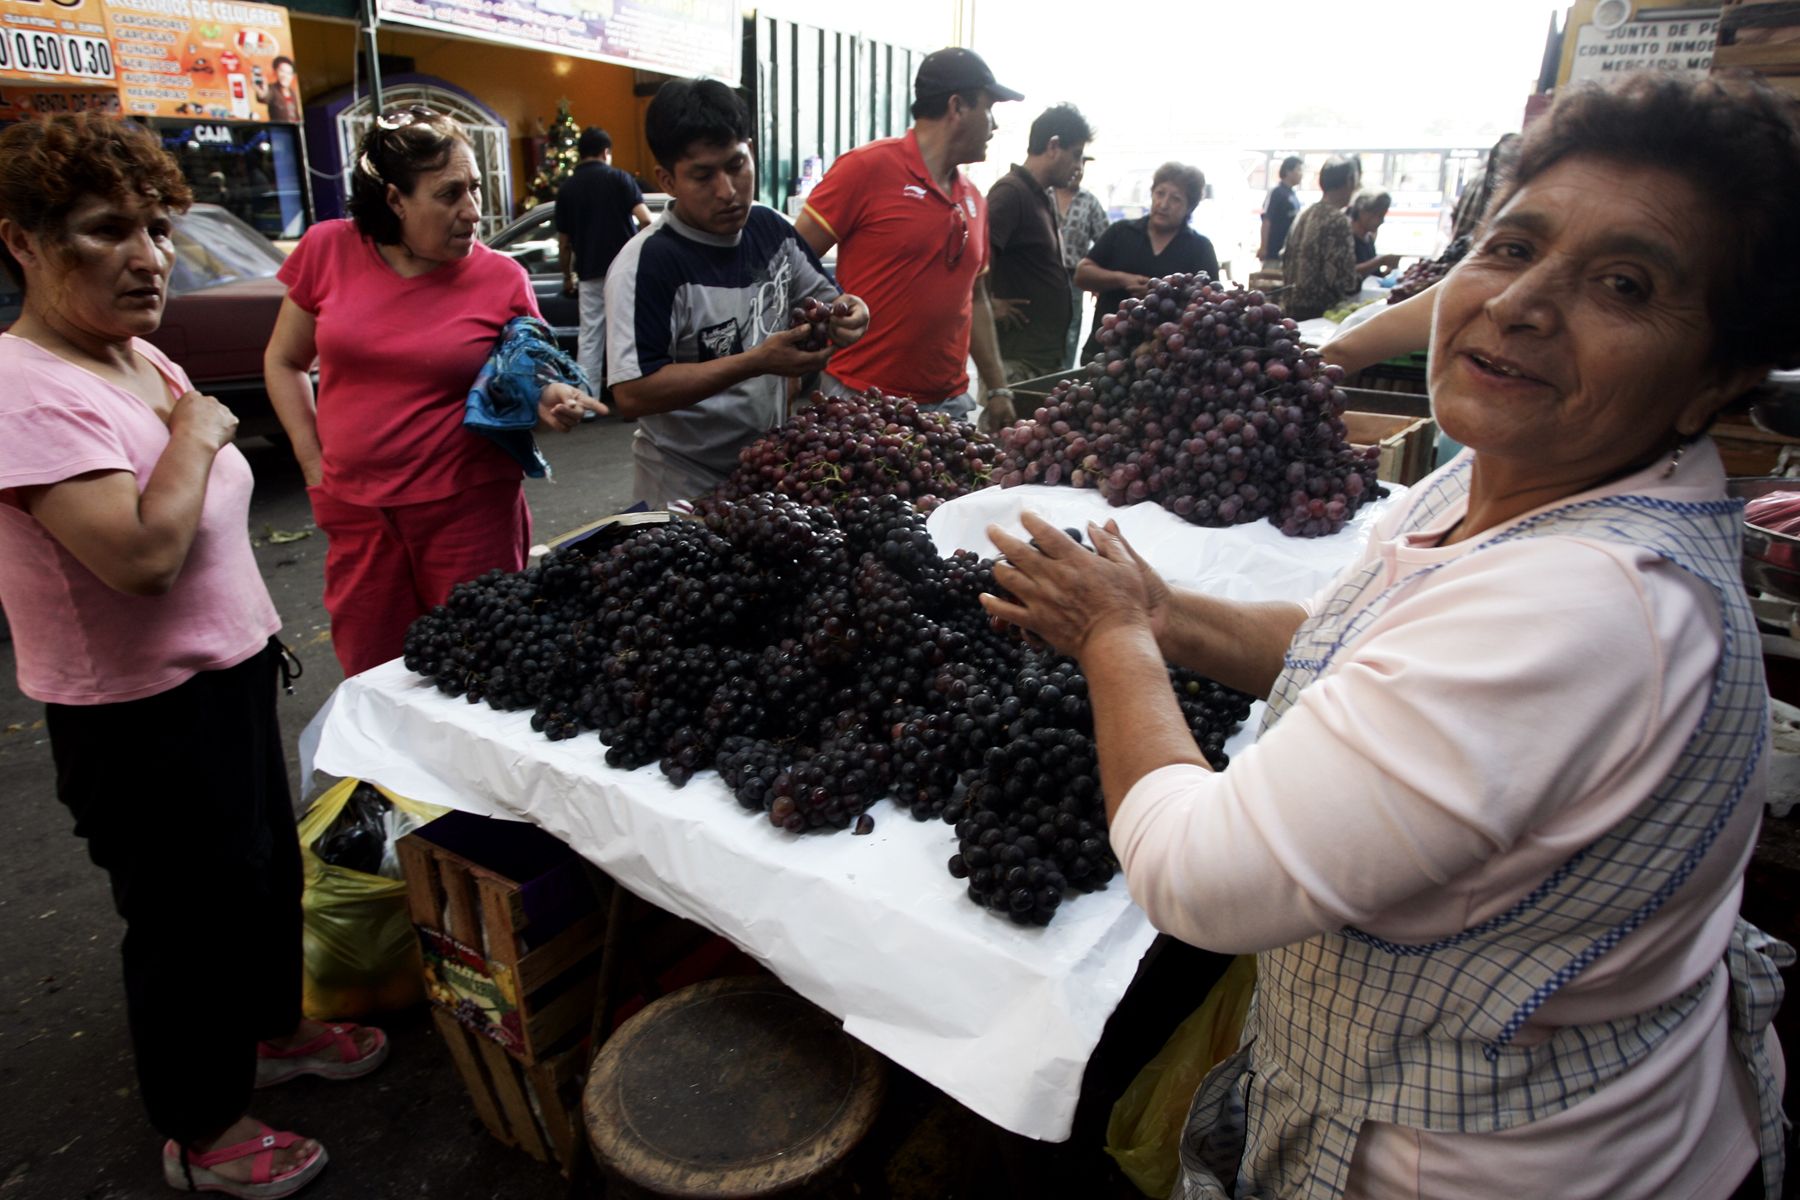 Grape sales to celebrate New Year